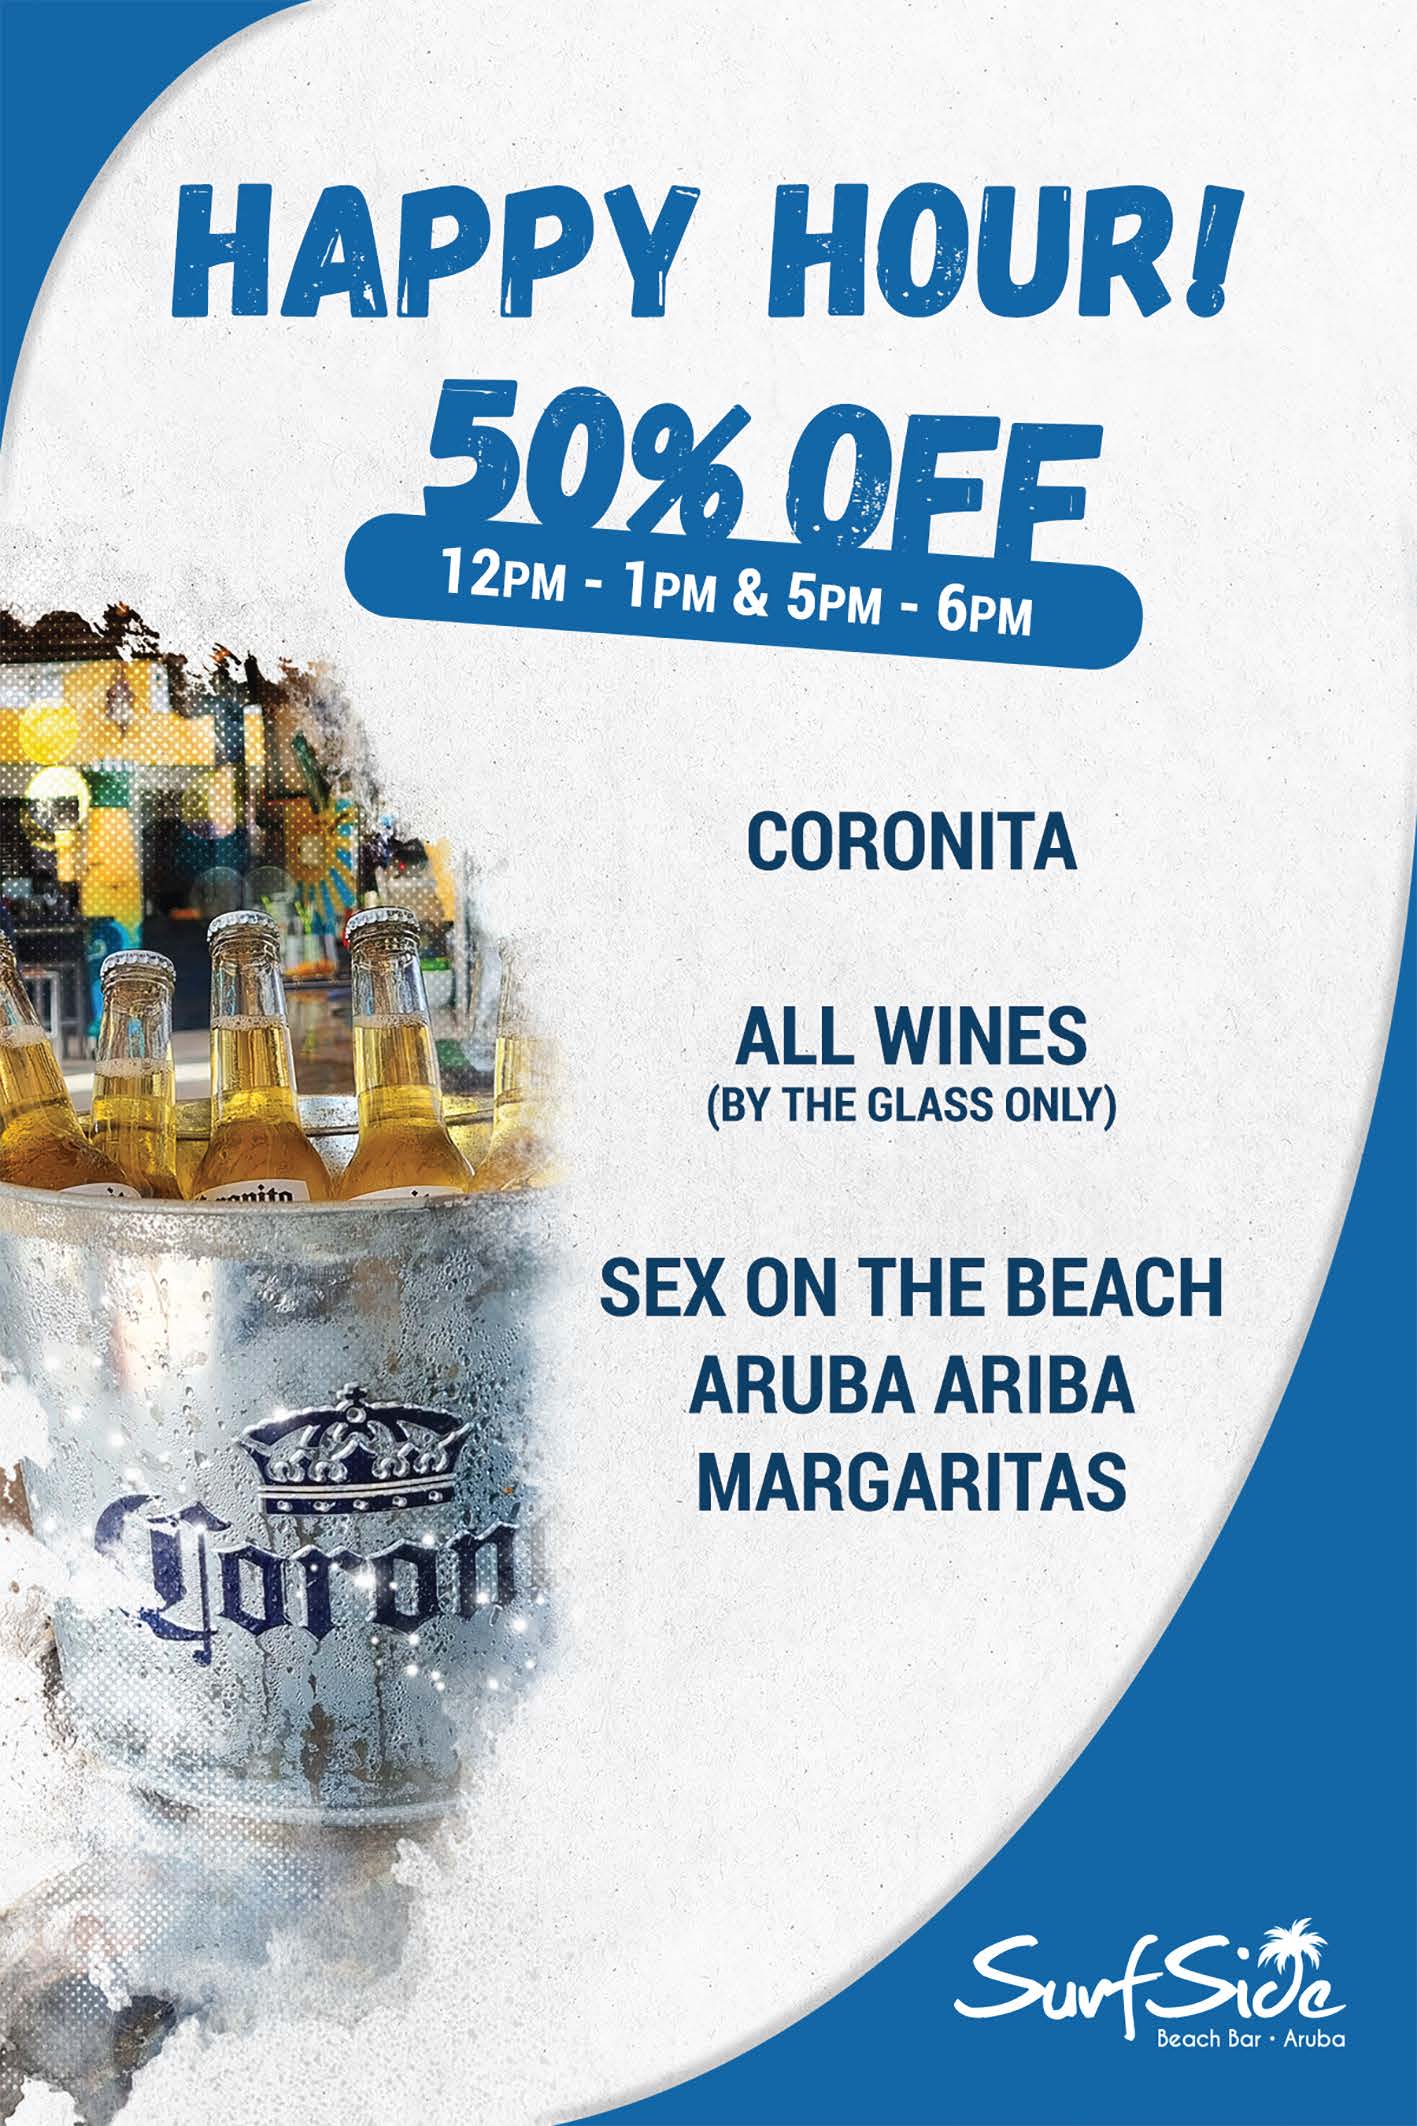 NEW Happy Hour Menu with 50 off at Surfside Beach Bar